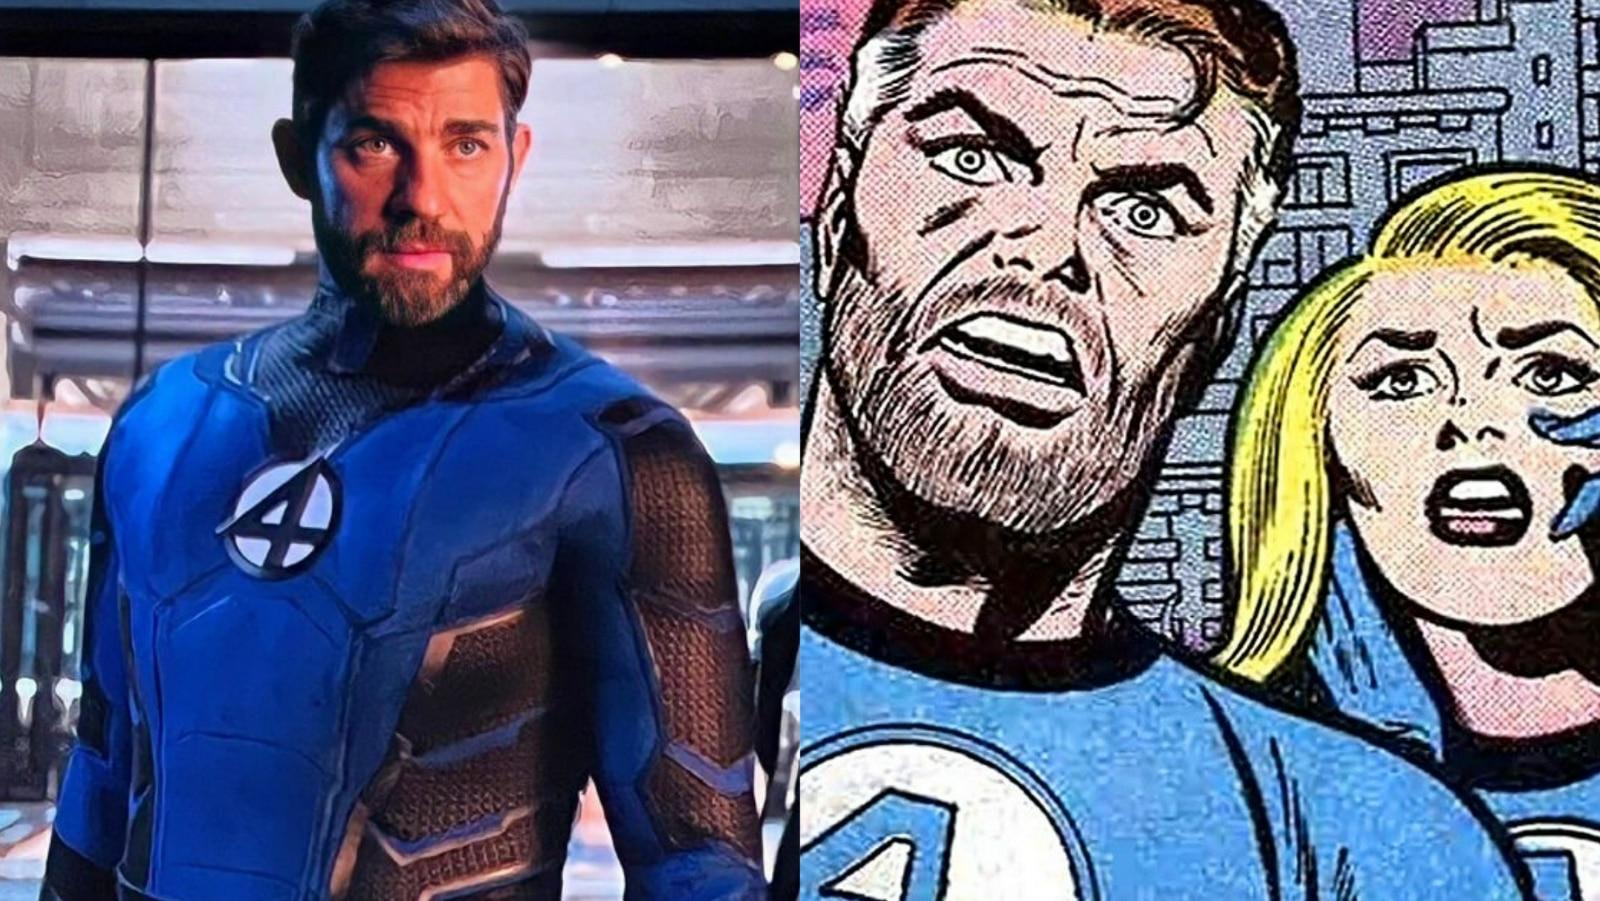 Mr fantastic in the comic and film